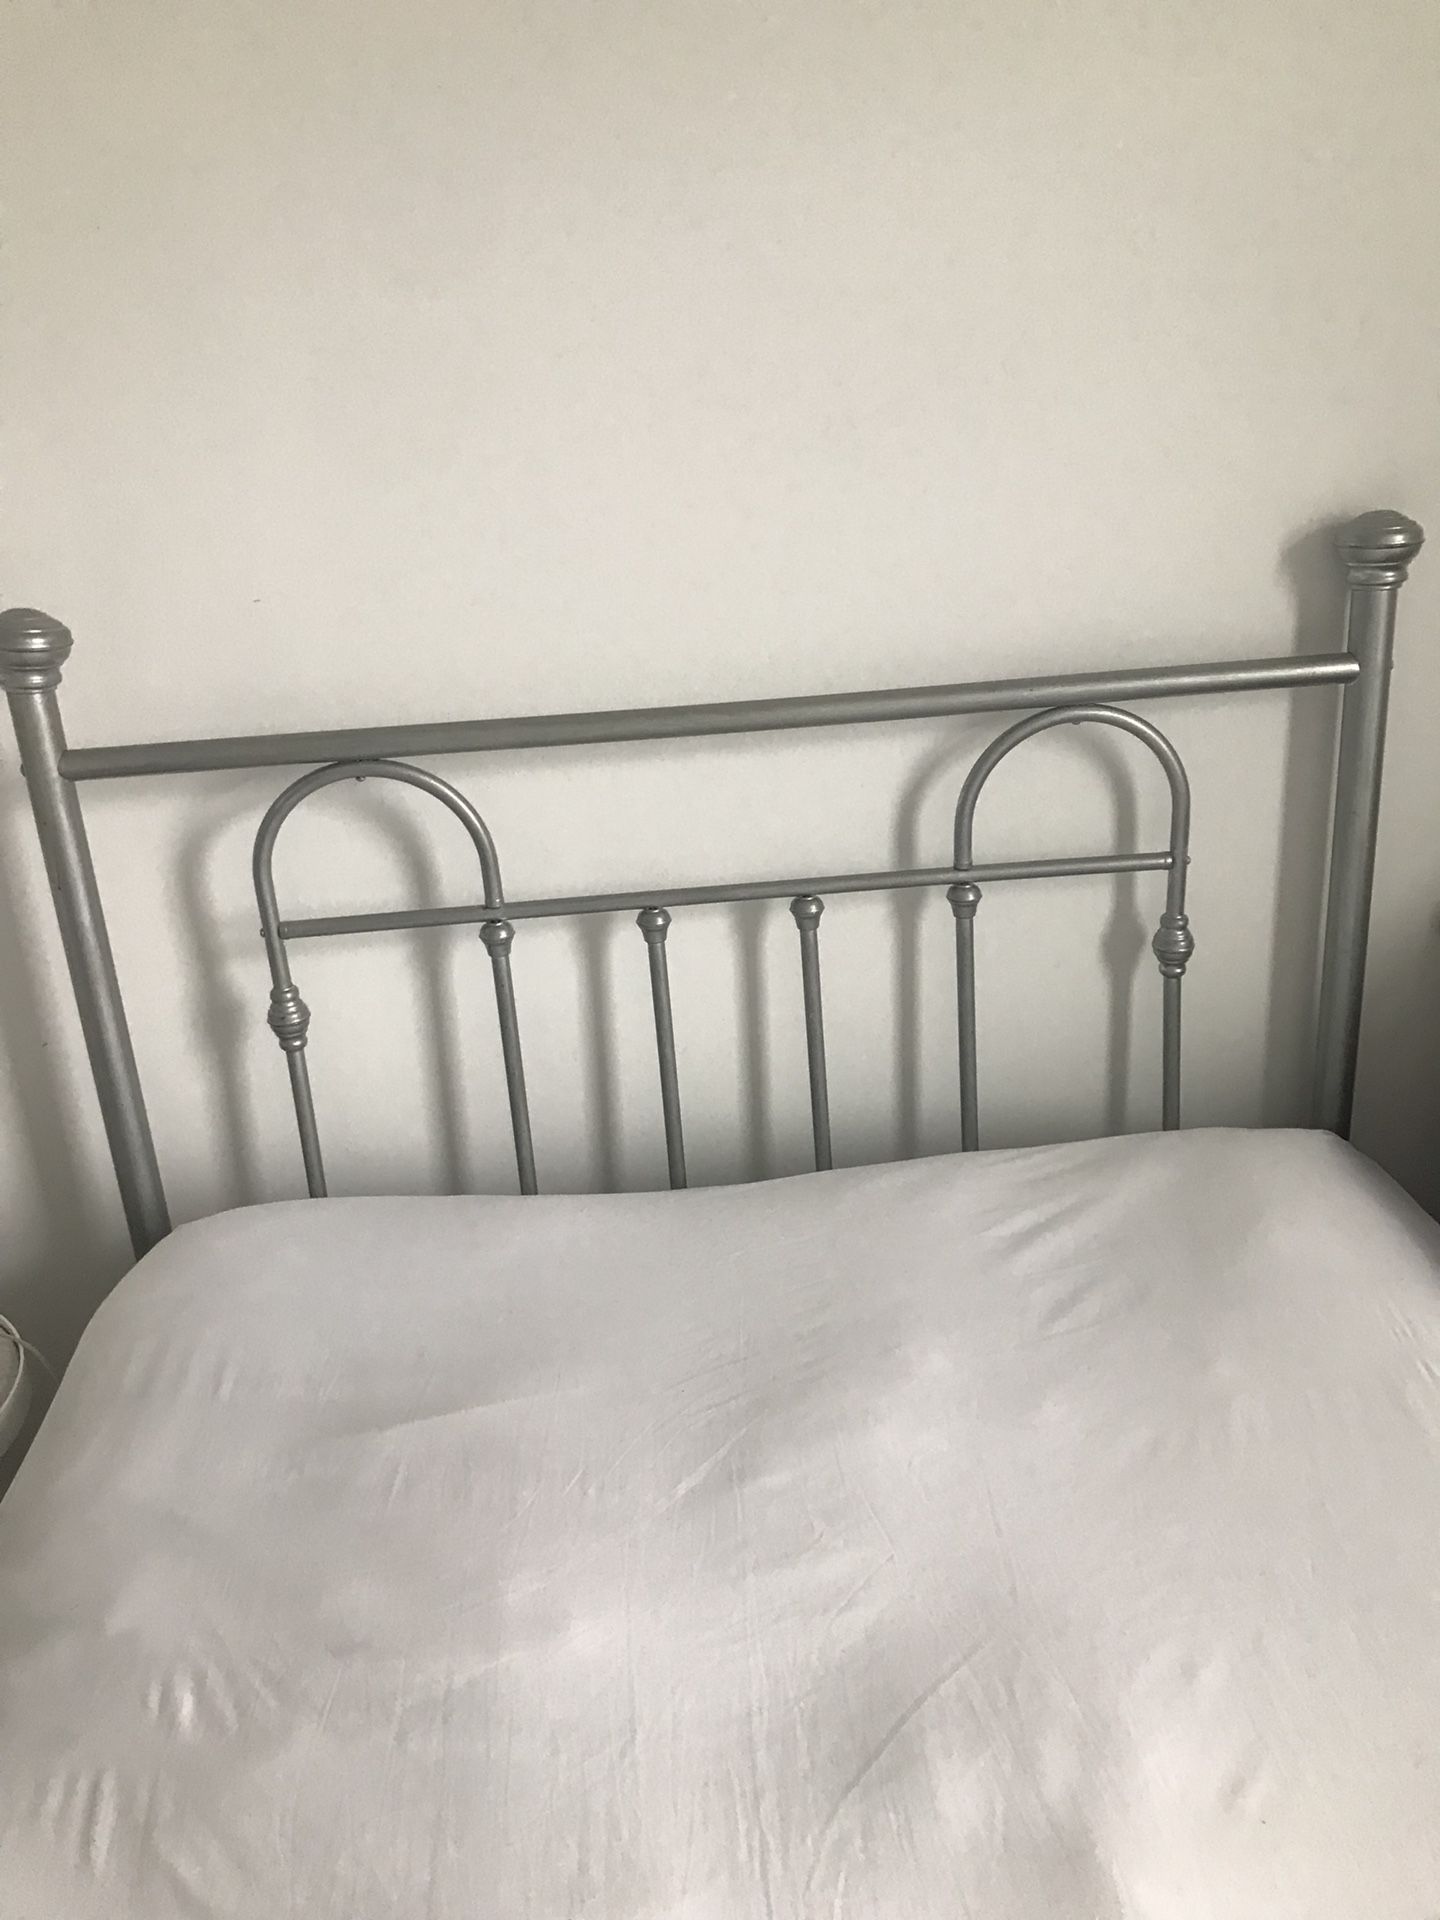 FREE Full size bed